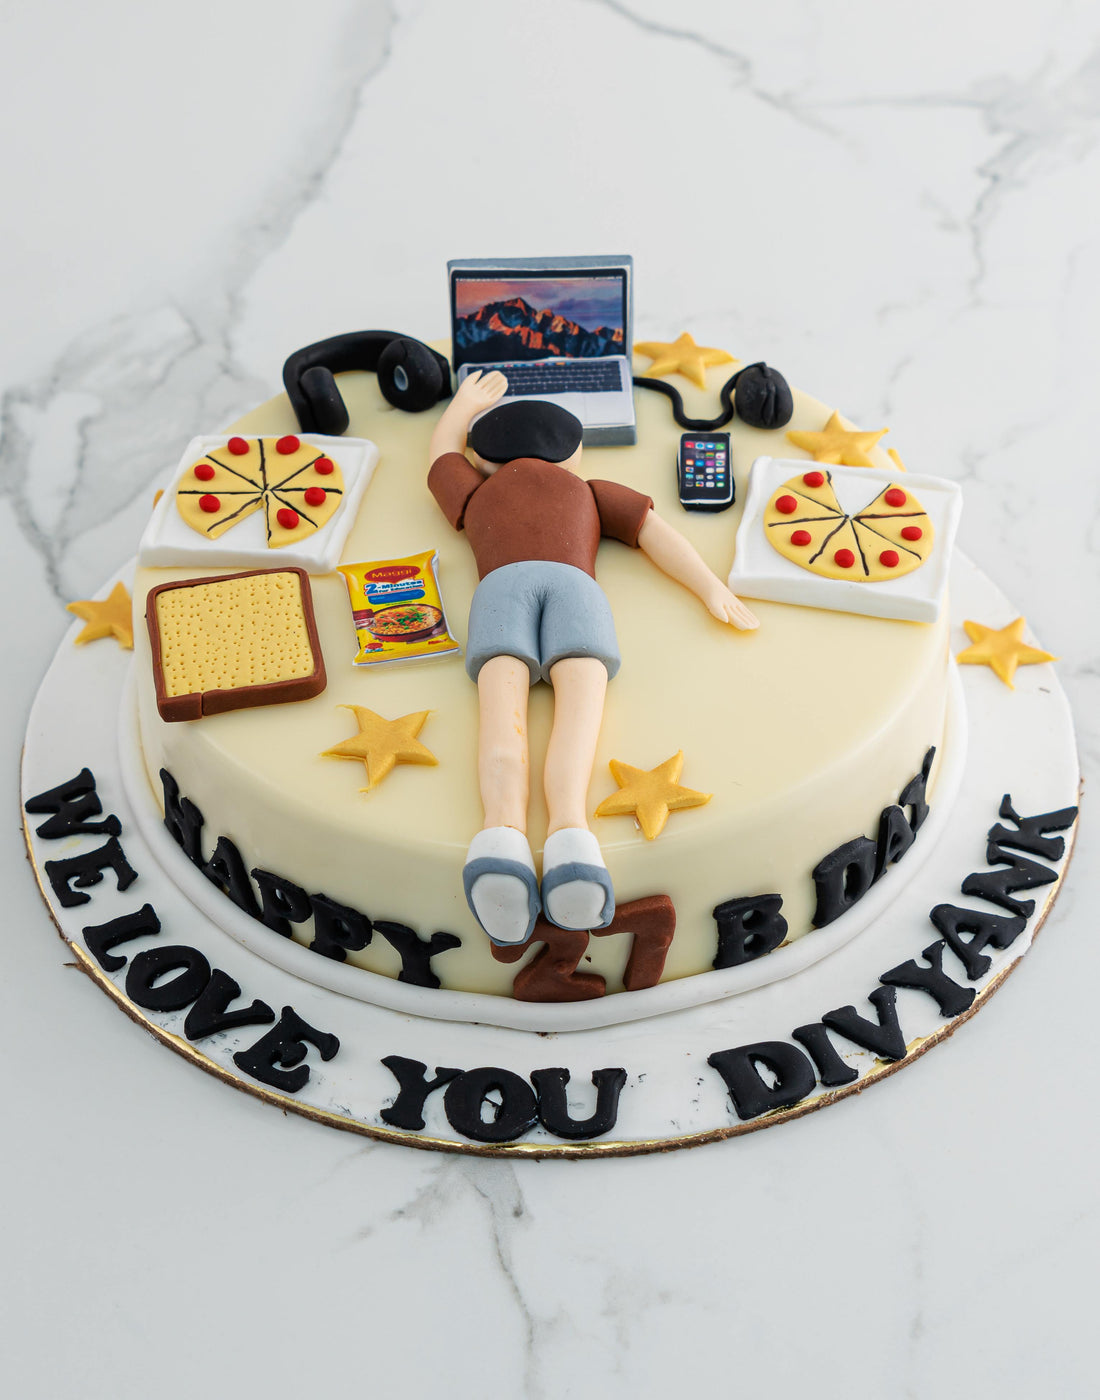 Workaholic Theme Cake by Creme Castle